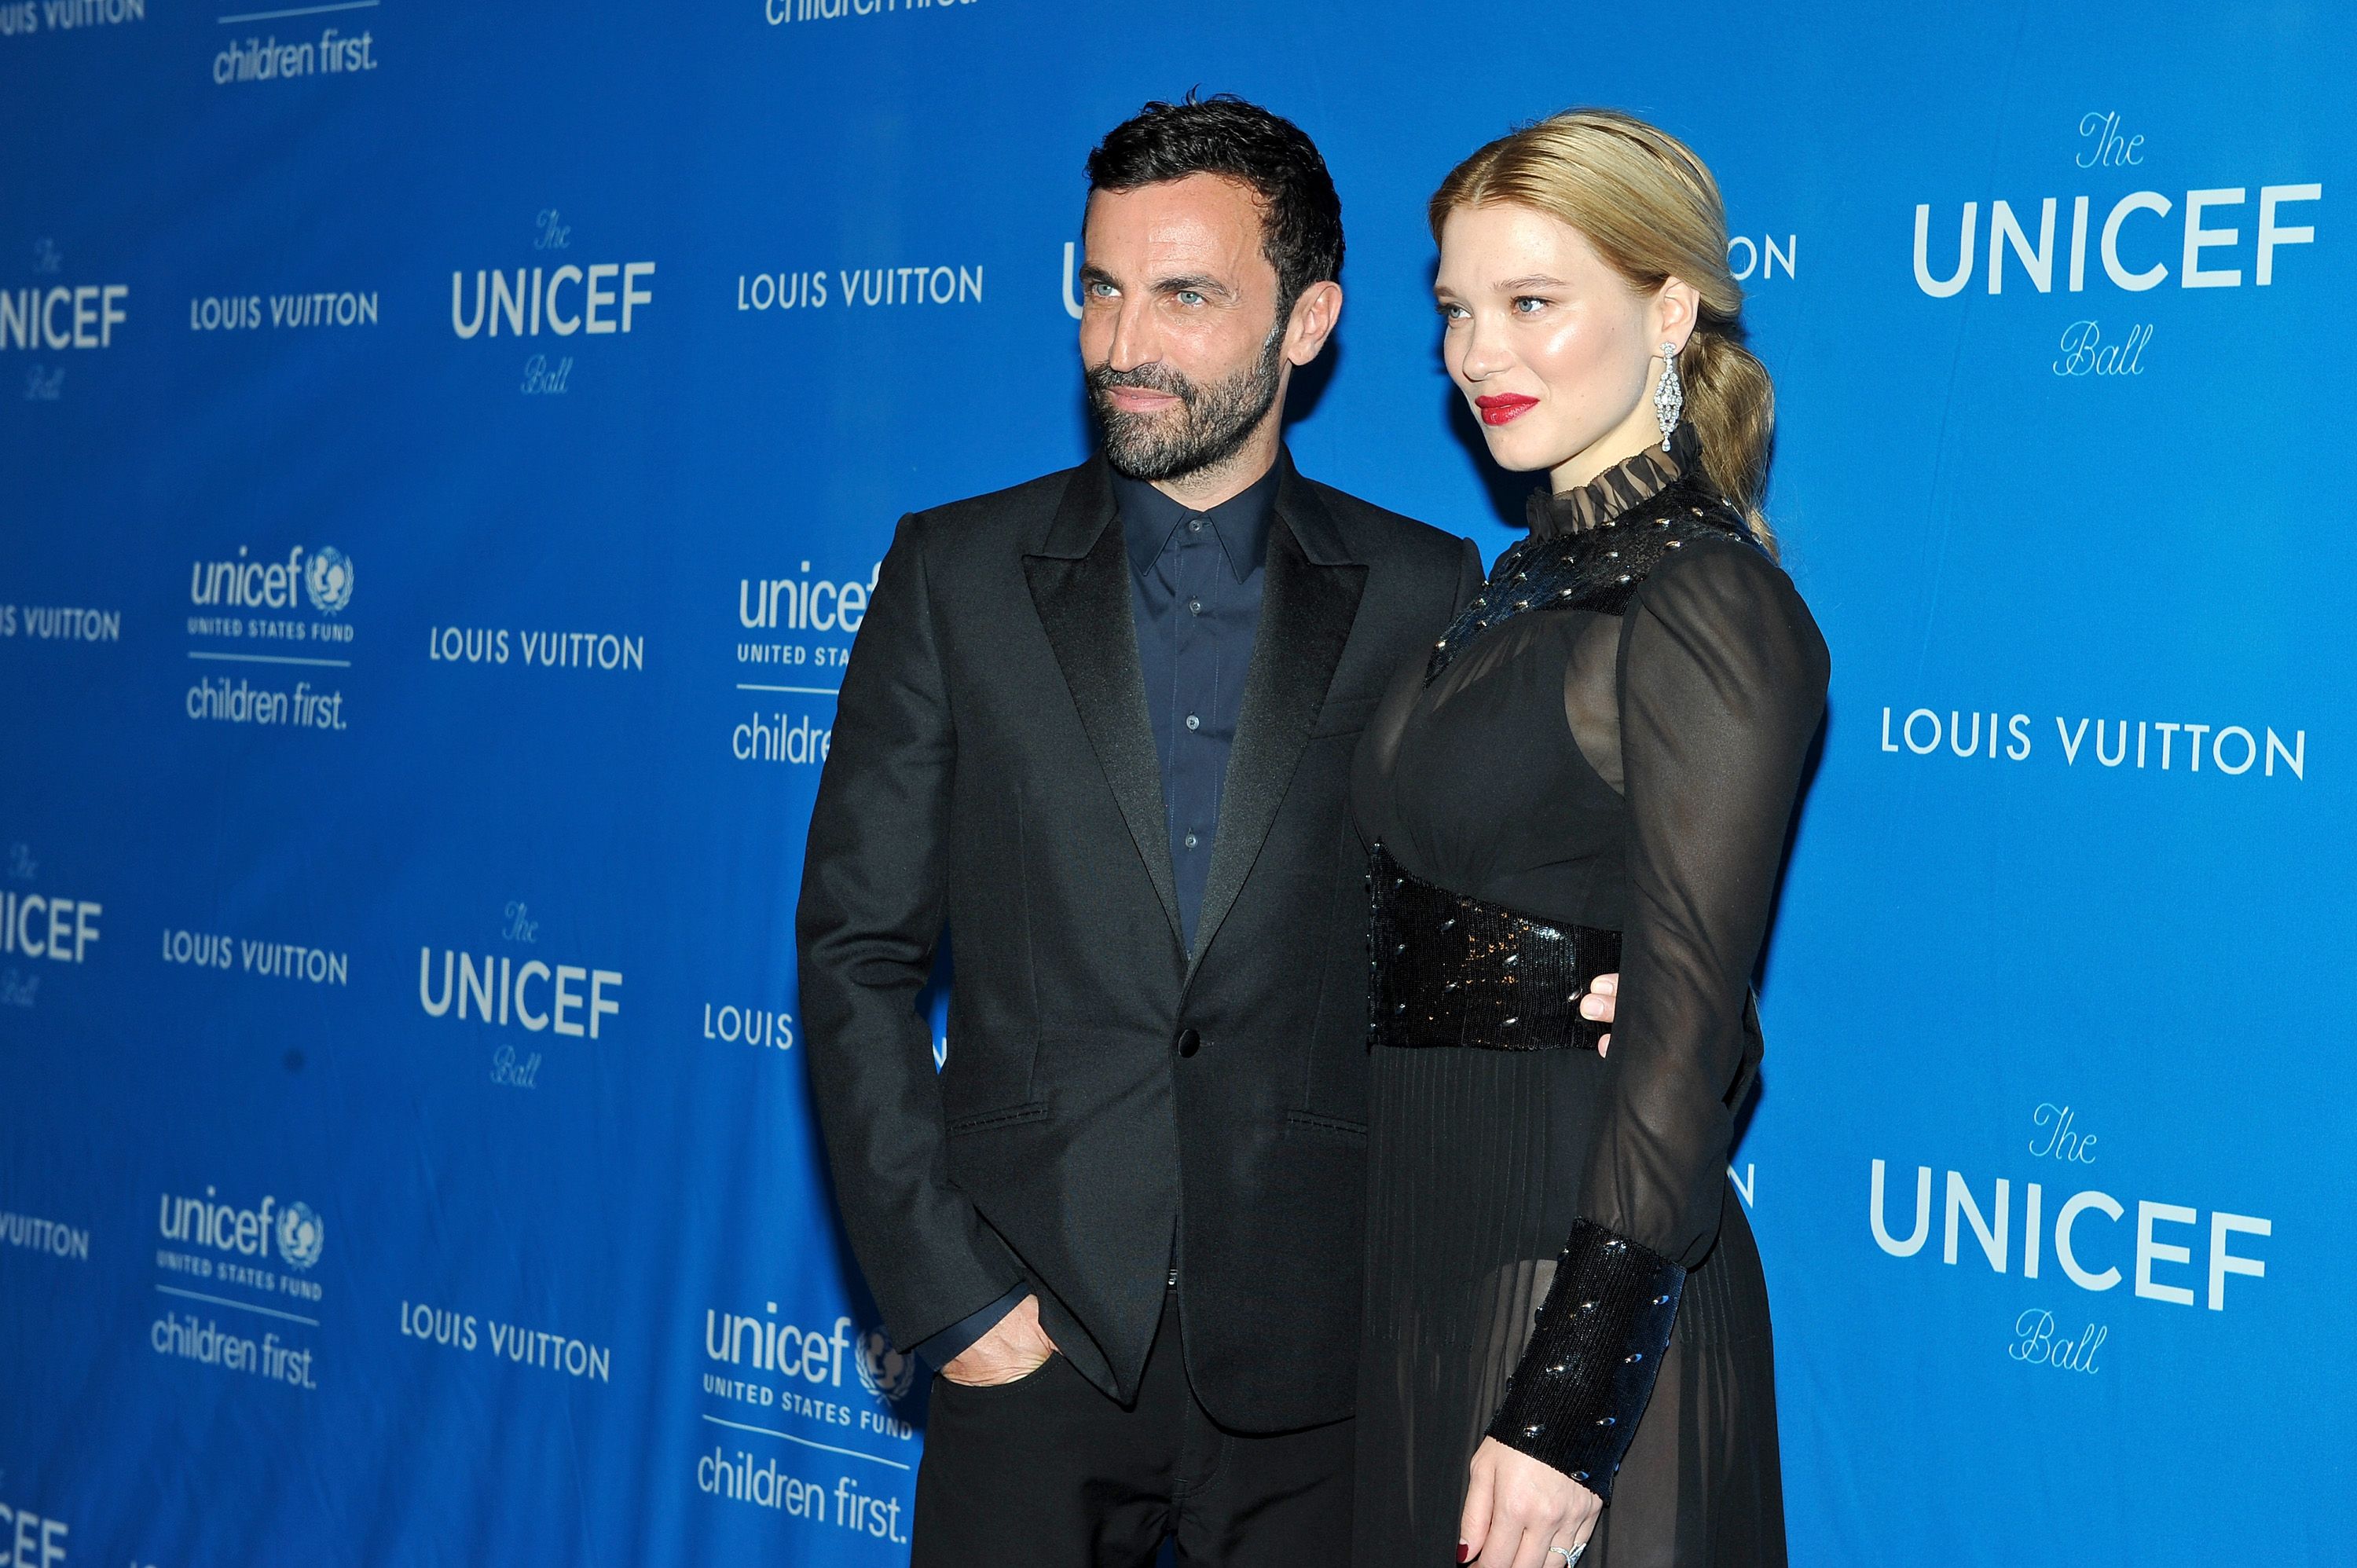 Louis Vuitton Partners With UNICEF